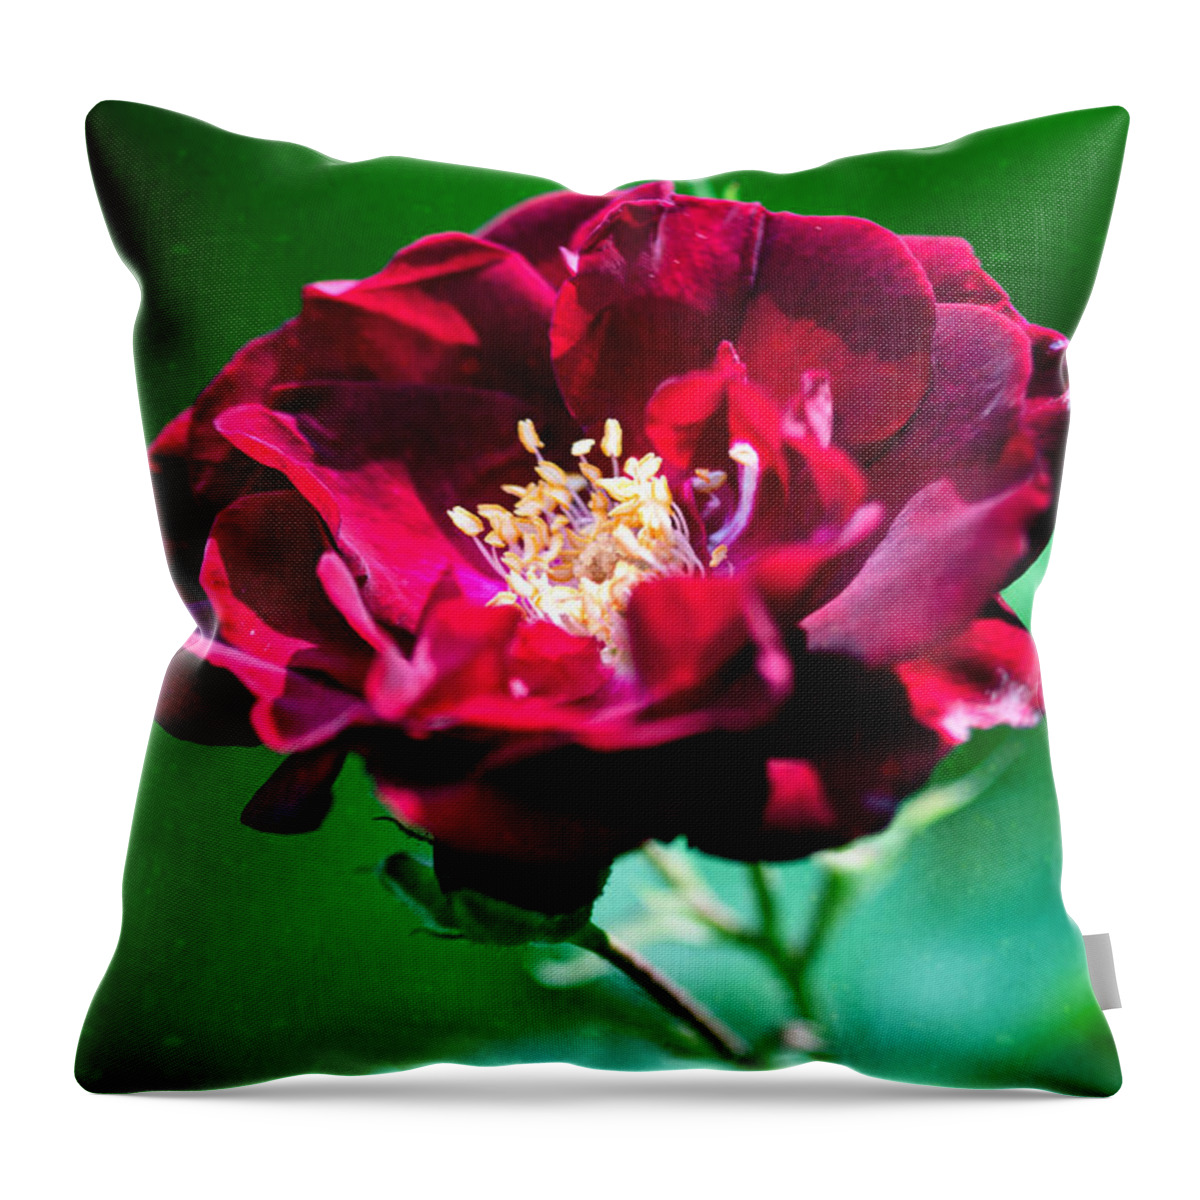 Garden Throw Pillow featuring the photograph Dark Red Rose by Crystal Wightman